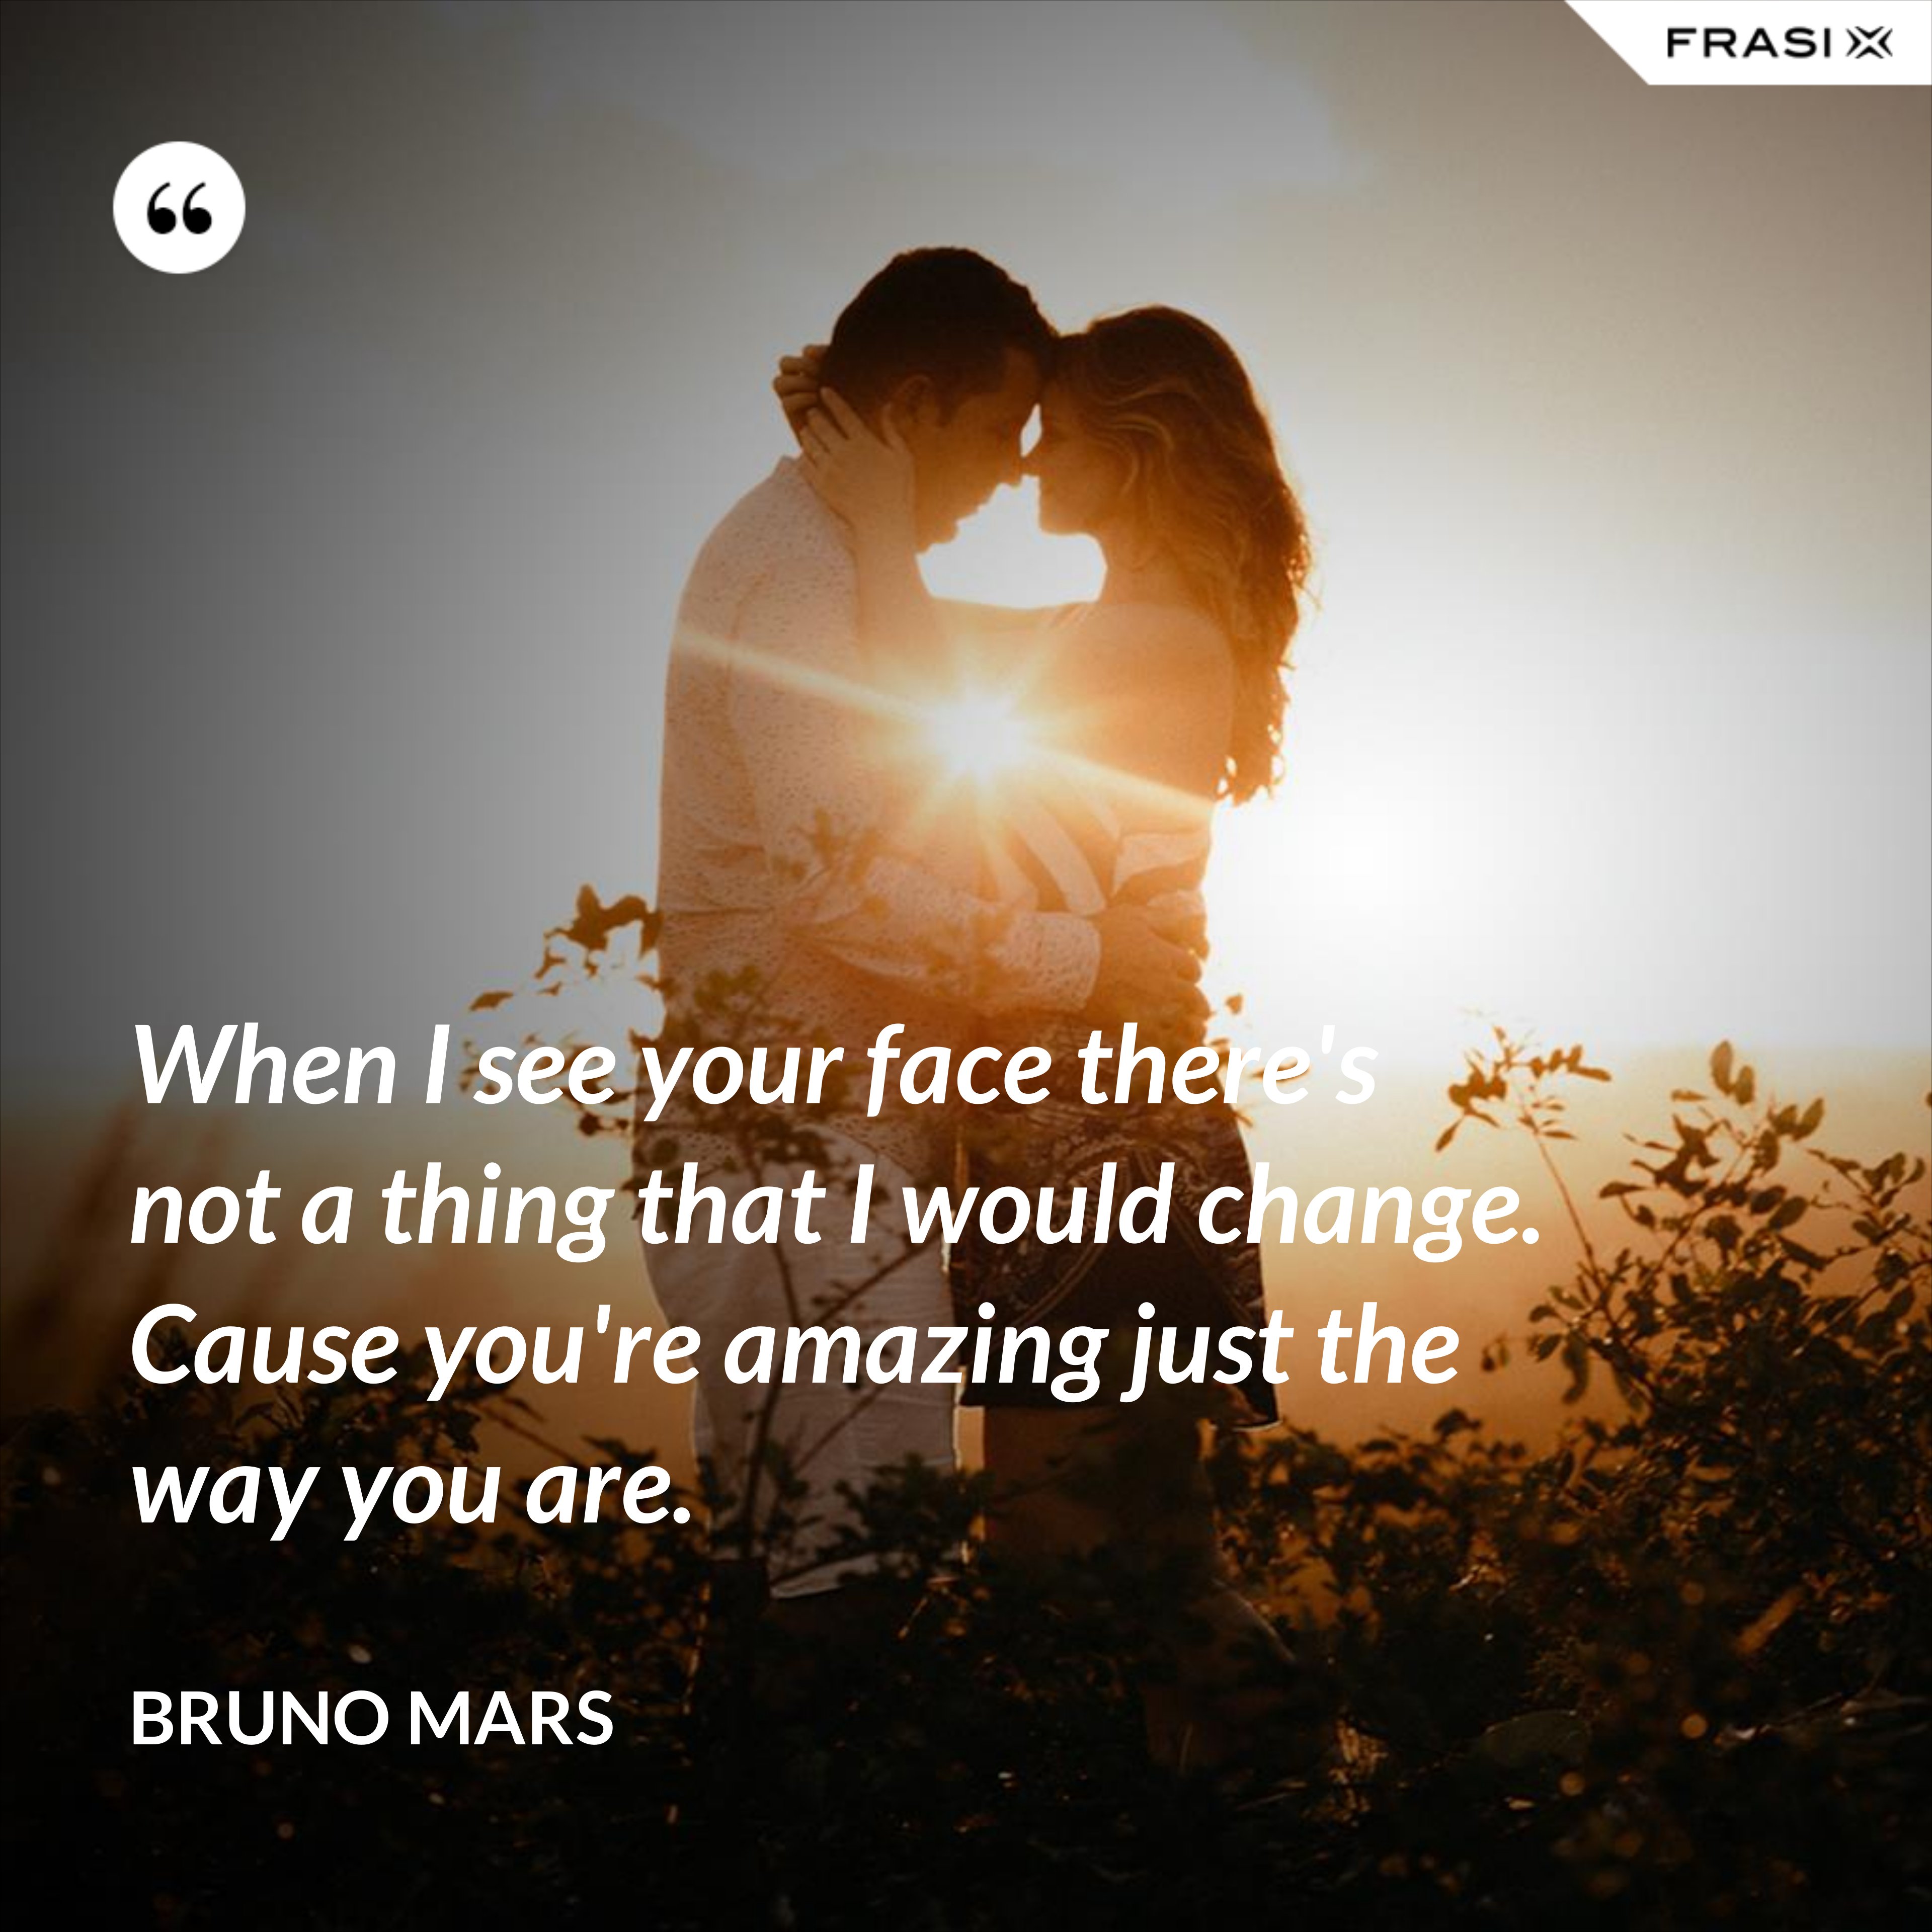 When I see your face there's not a thing that I would change. Cause you're amazing just the way you are. - Bruno Mars